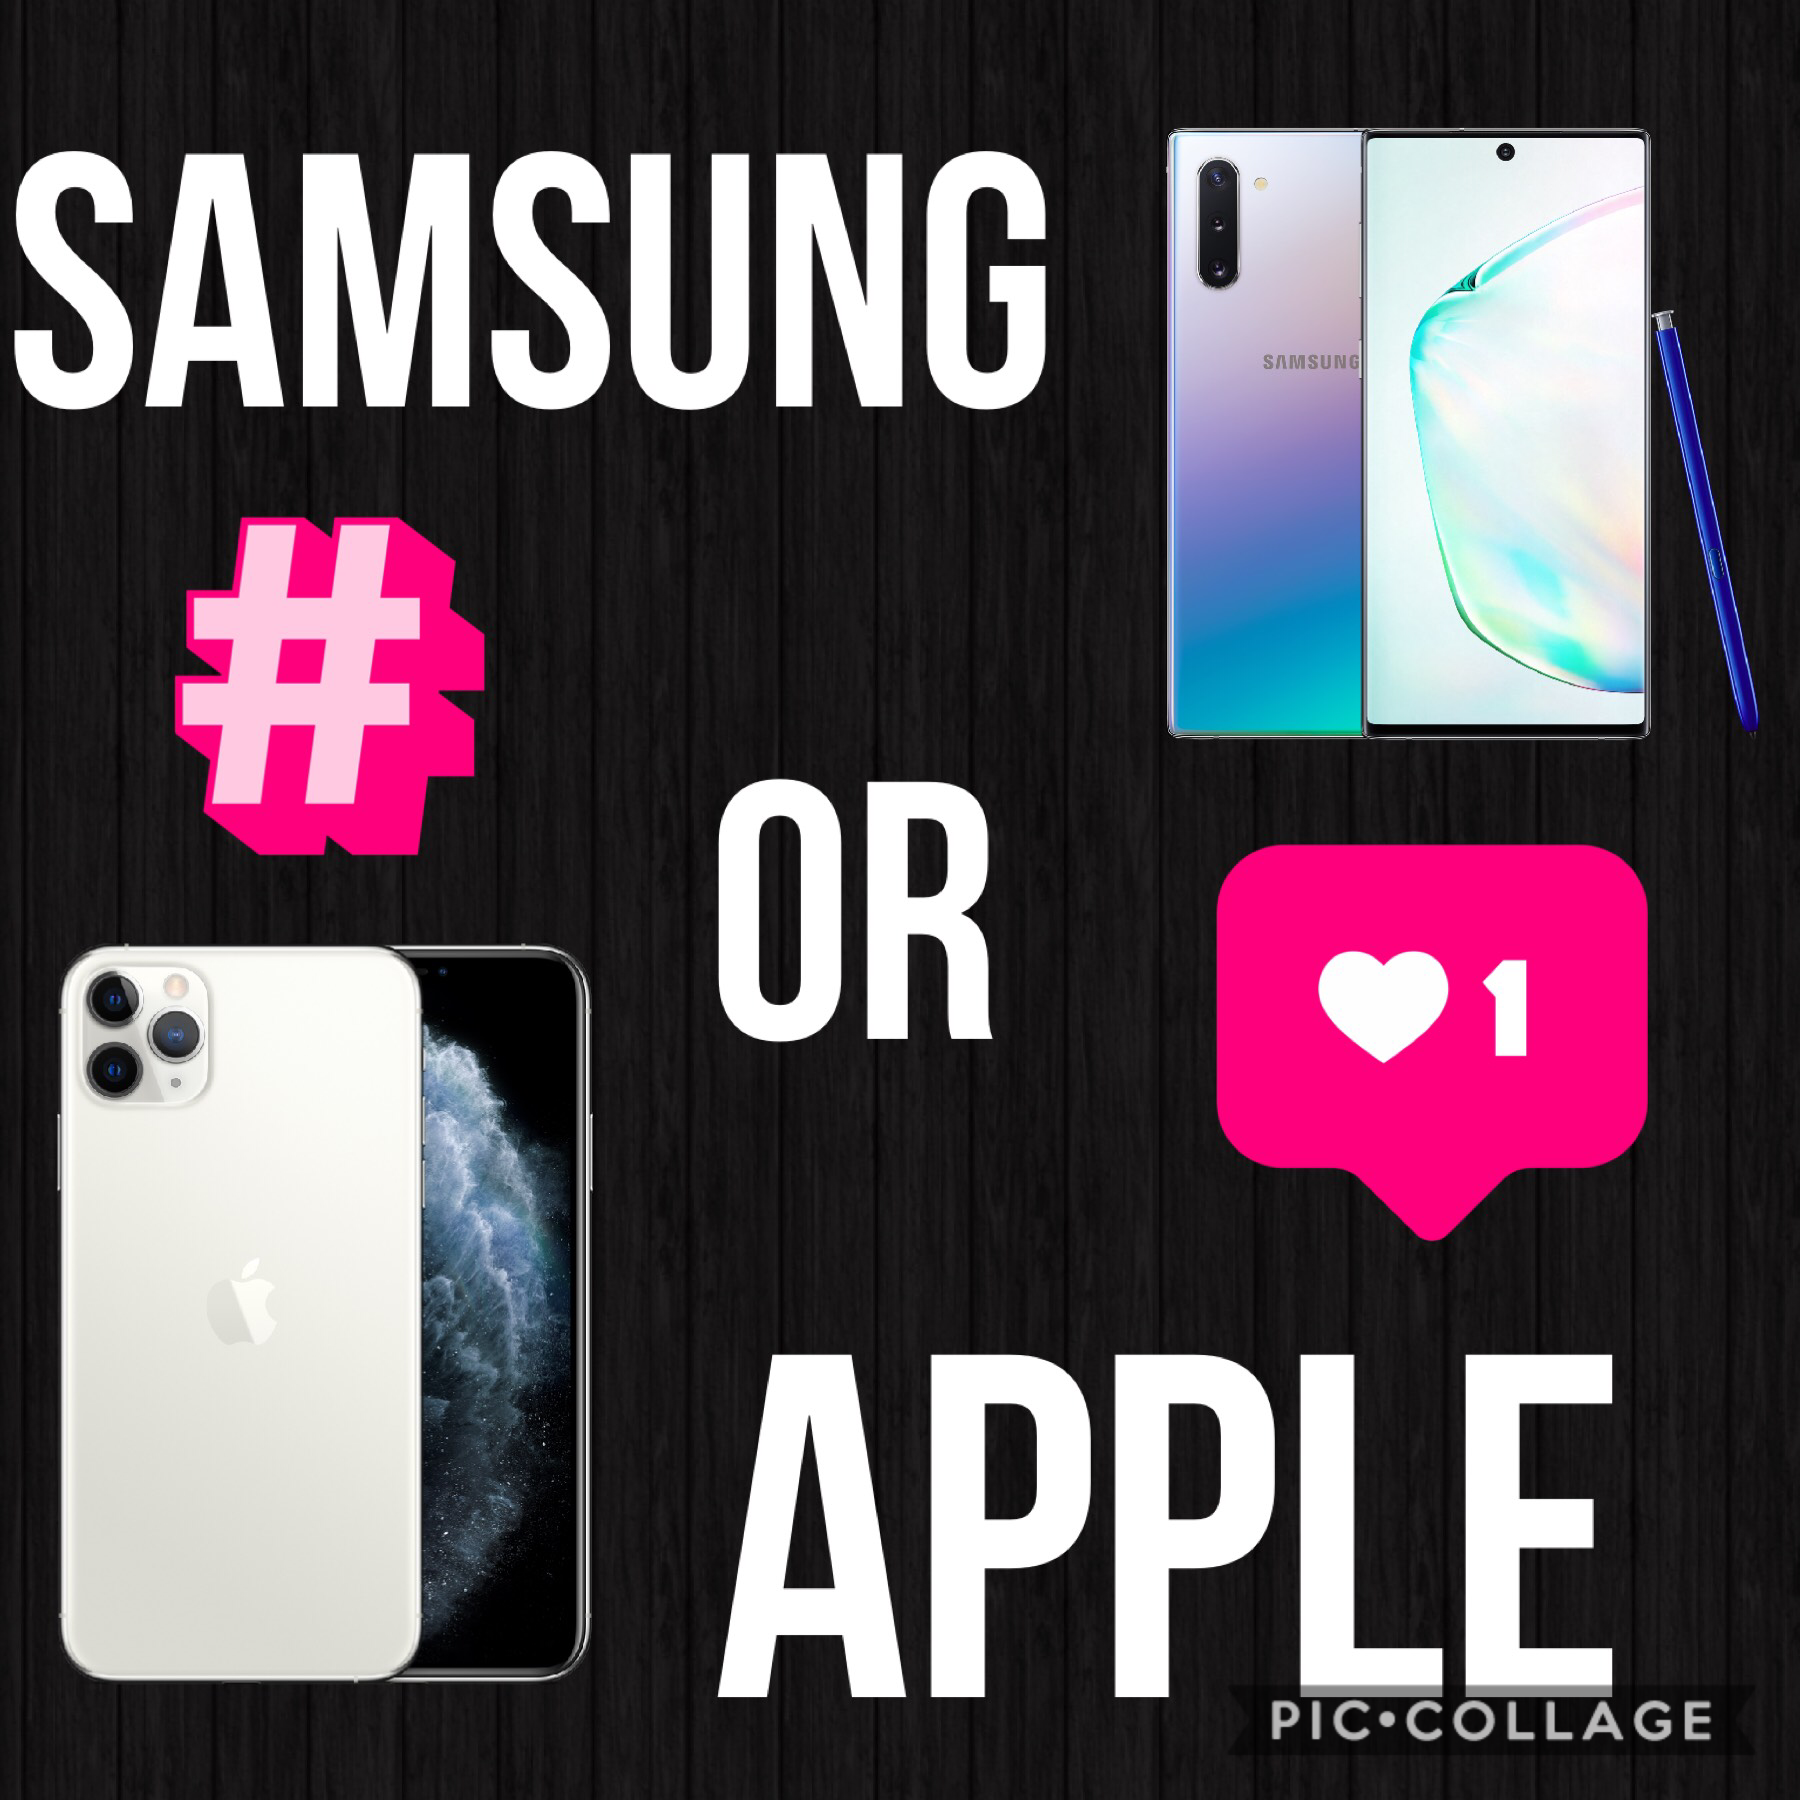 WHAT DO YOU PREFER, SAMSUNG OR APPLE??

LET ME KNOW IN THE COMMENTS SECTION.